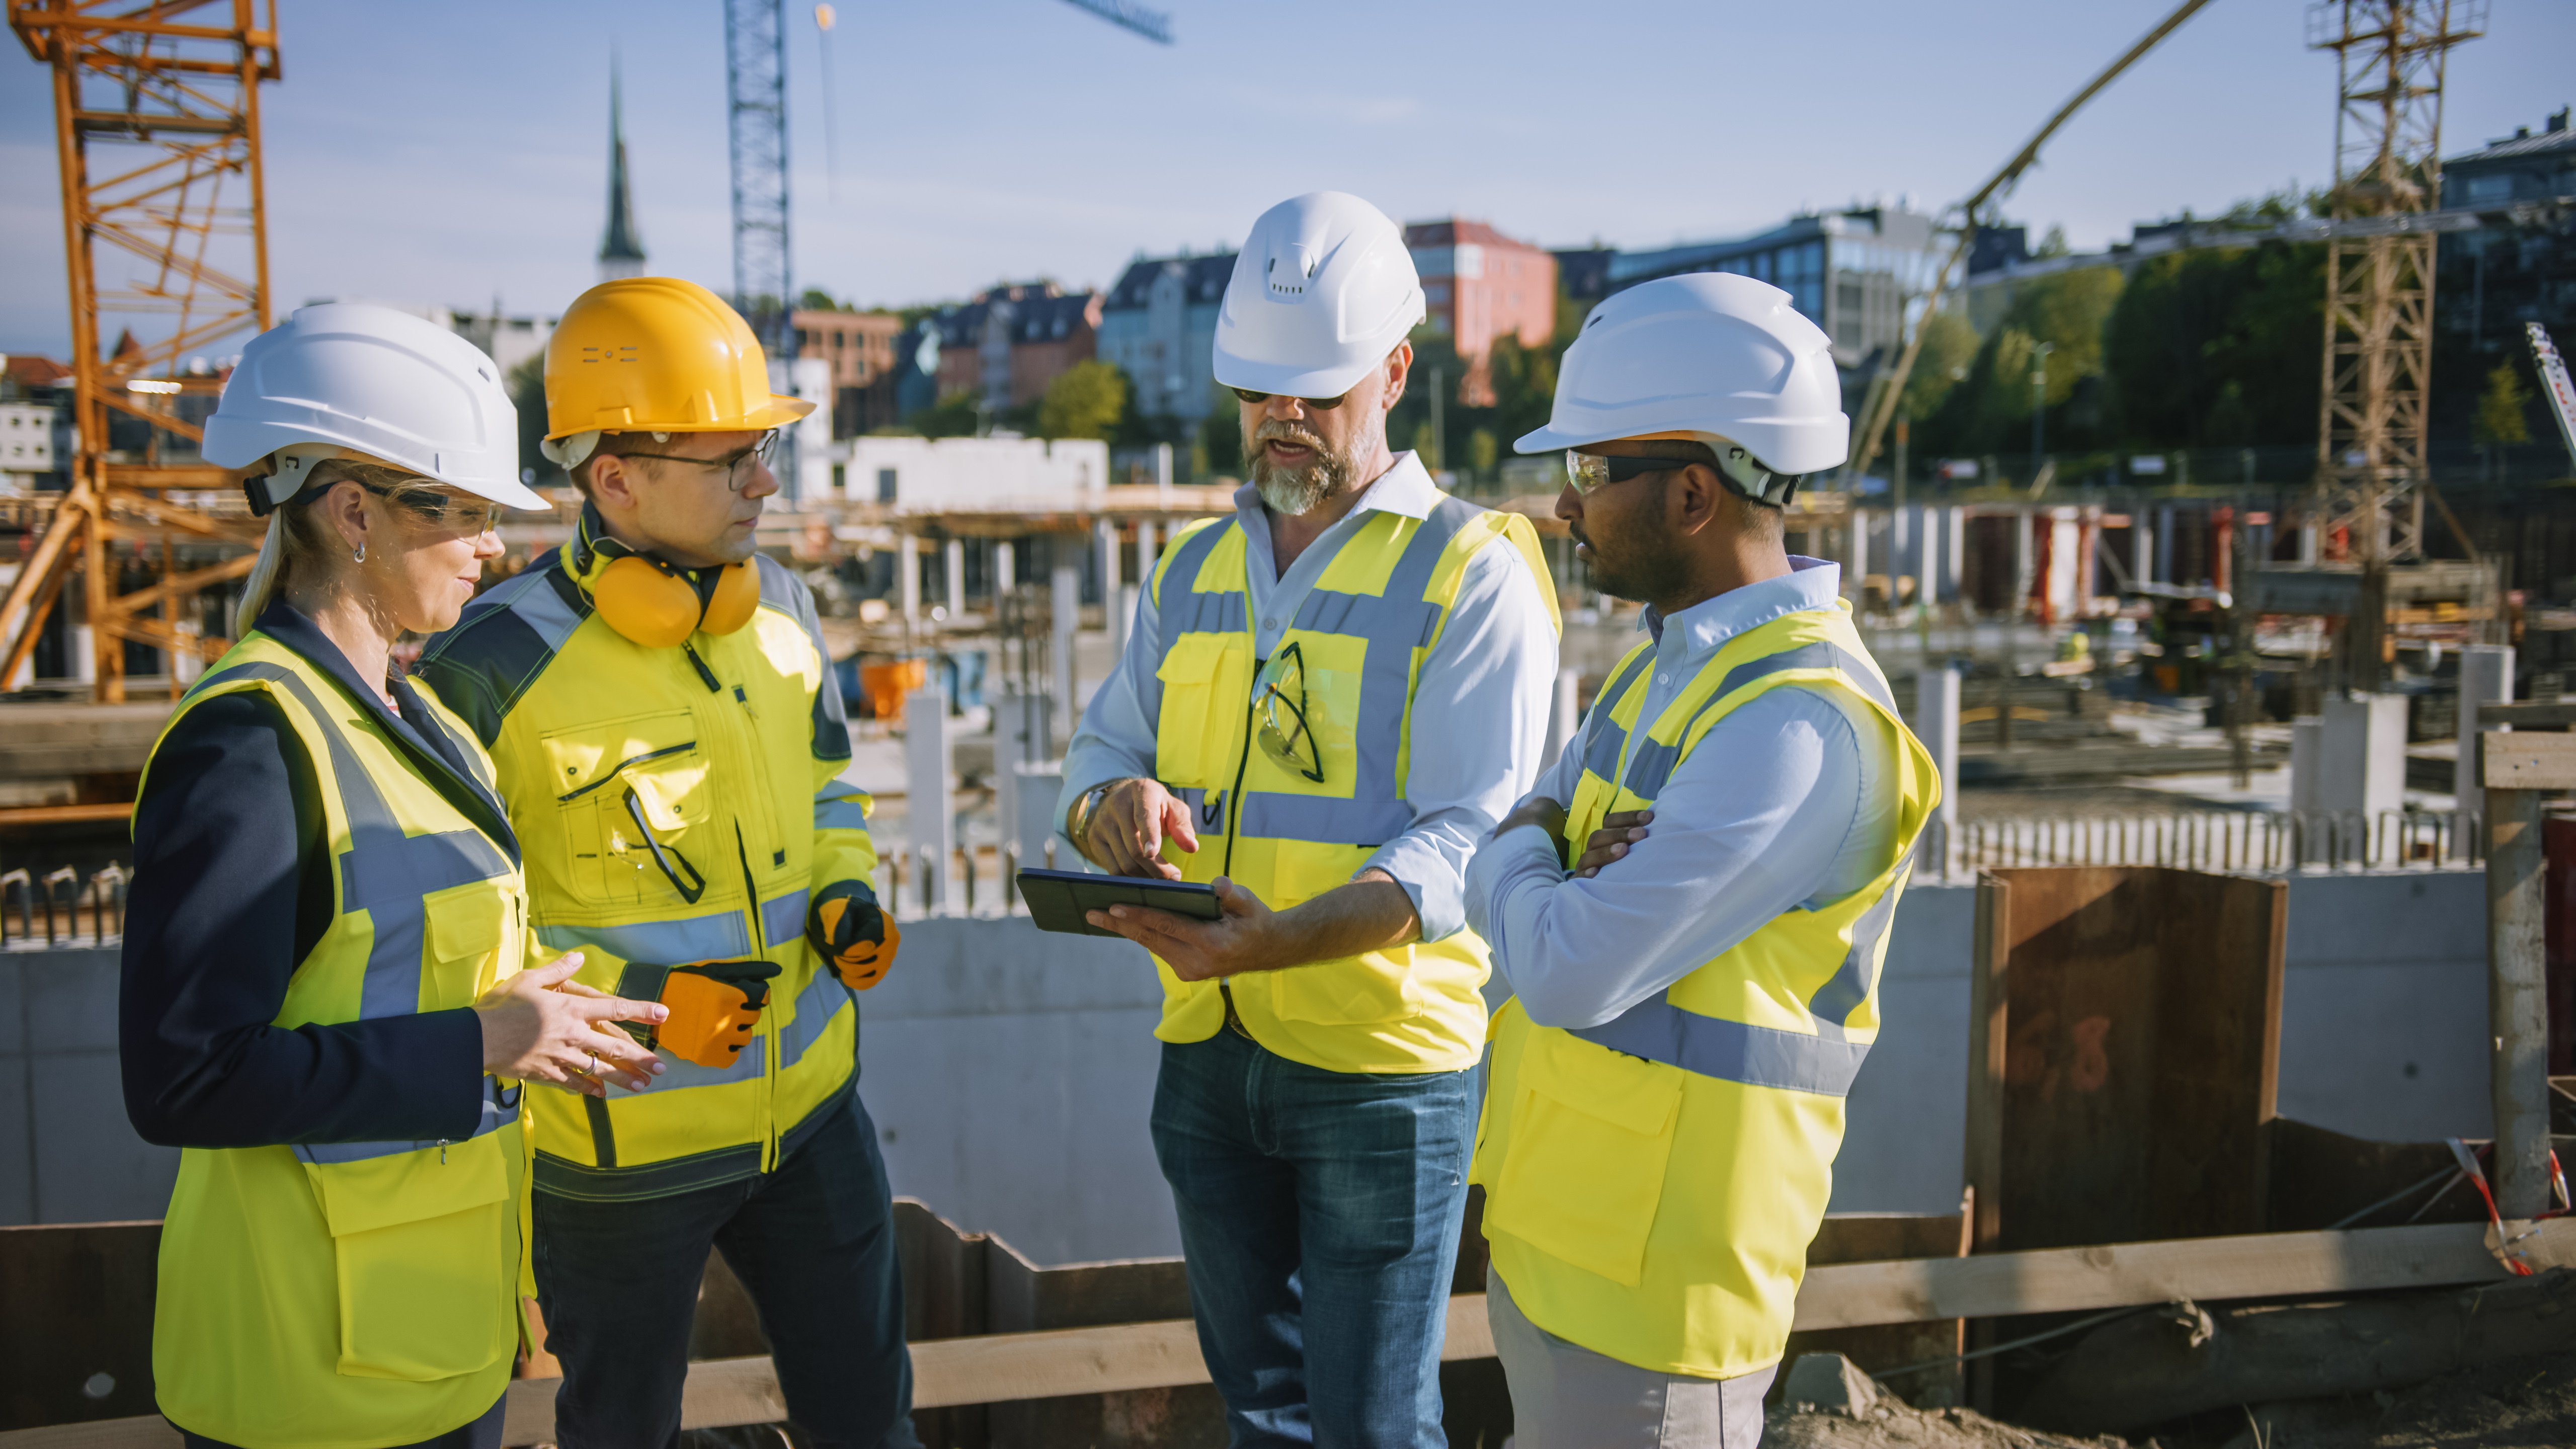 4 people standing on a construction site with one of them holding an iPad